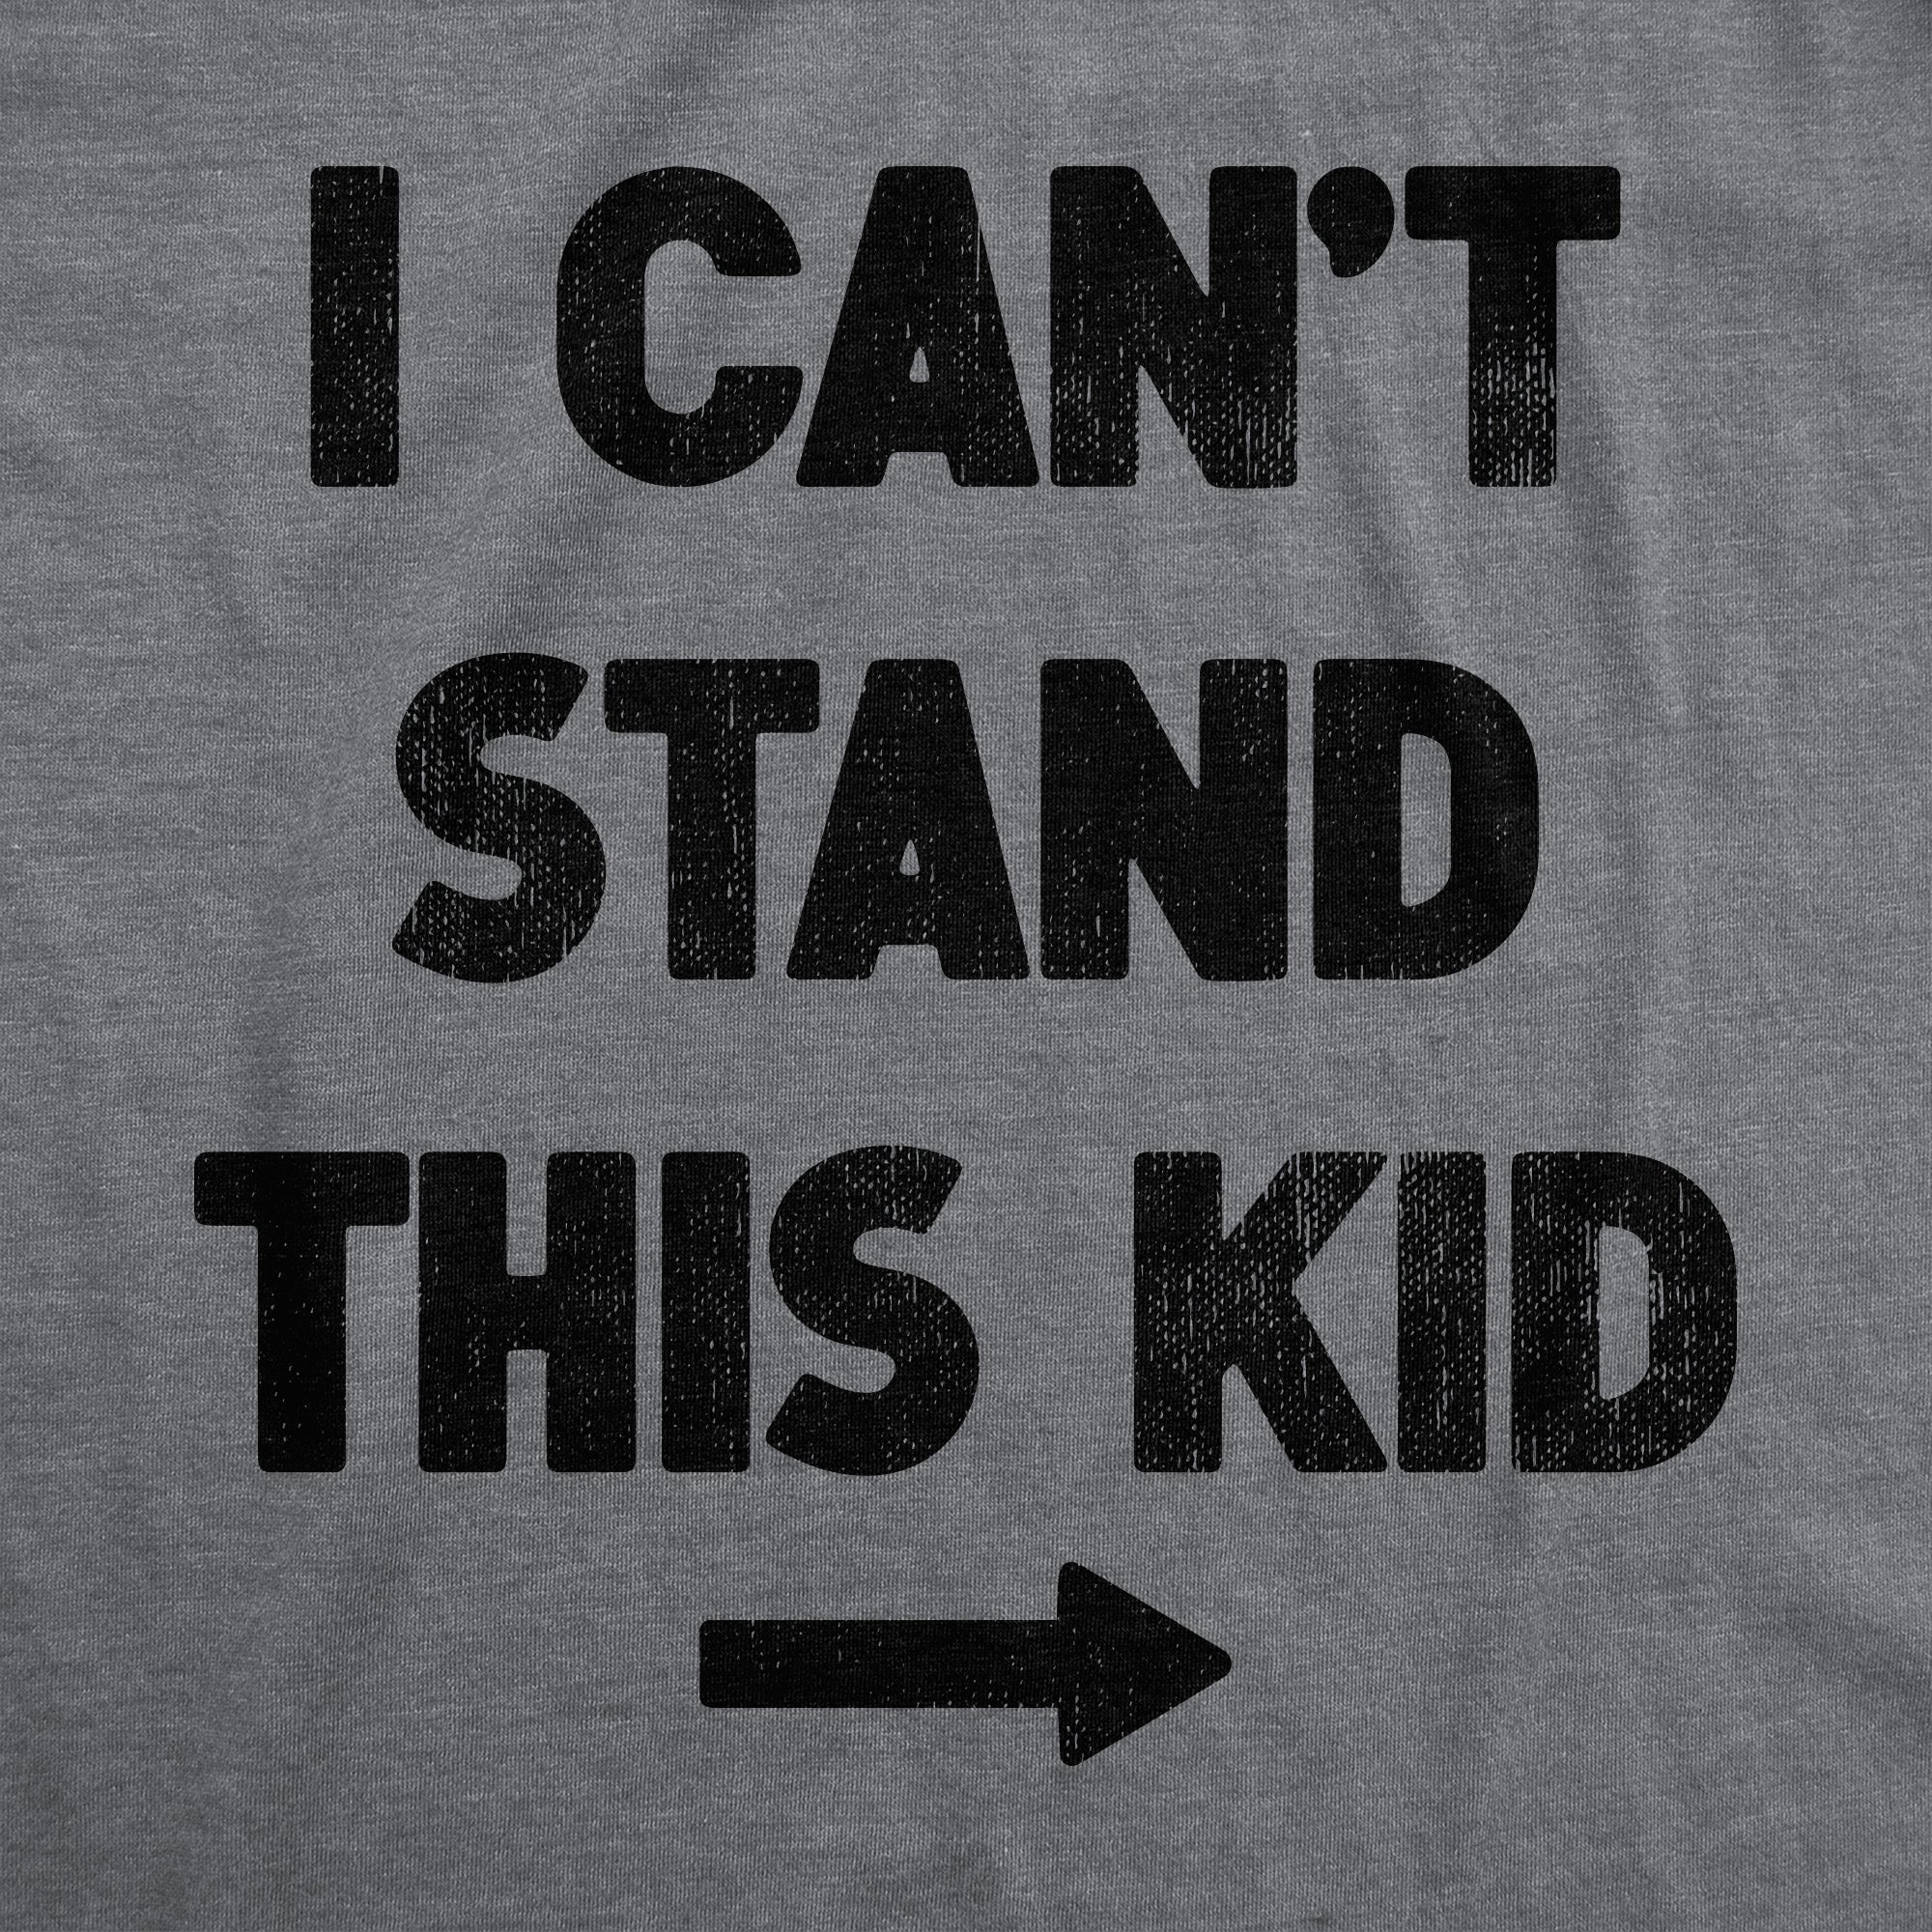 Funny Dark Heather Grey - KID I Cant Stand This Kid Mens T Shirt Nerdy Sarcastic Tee